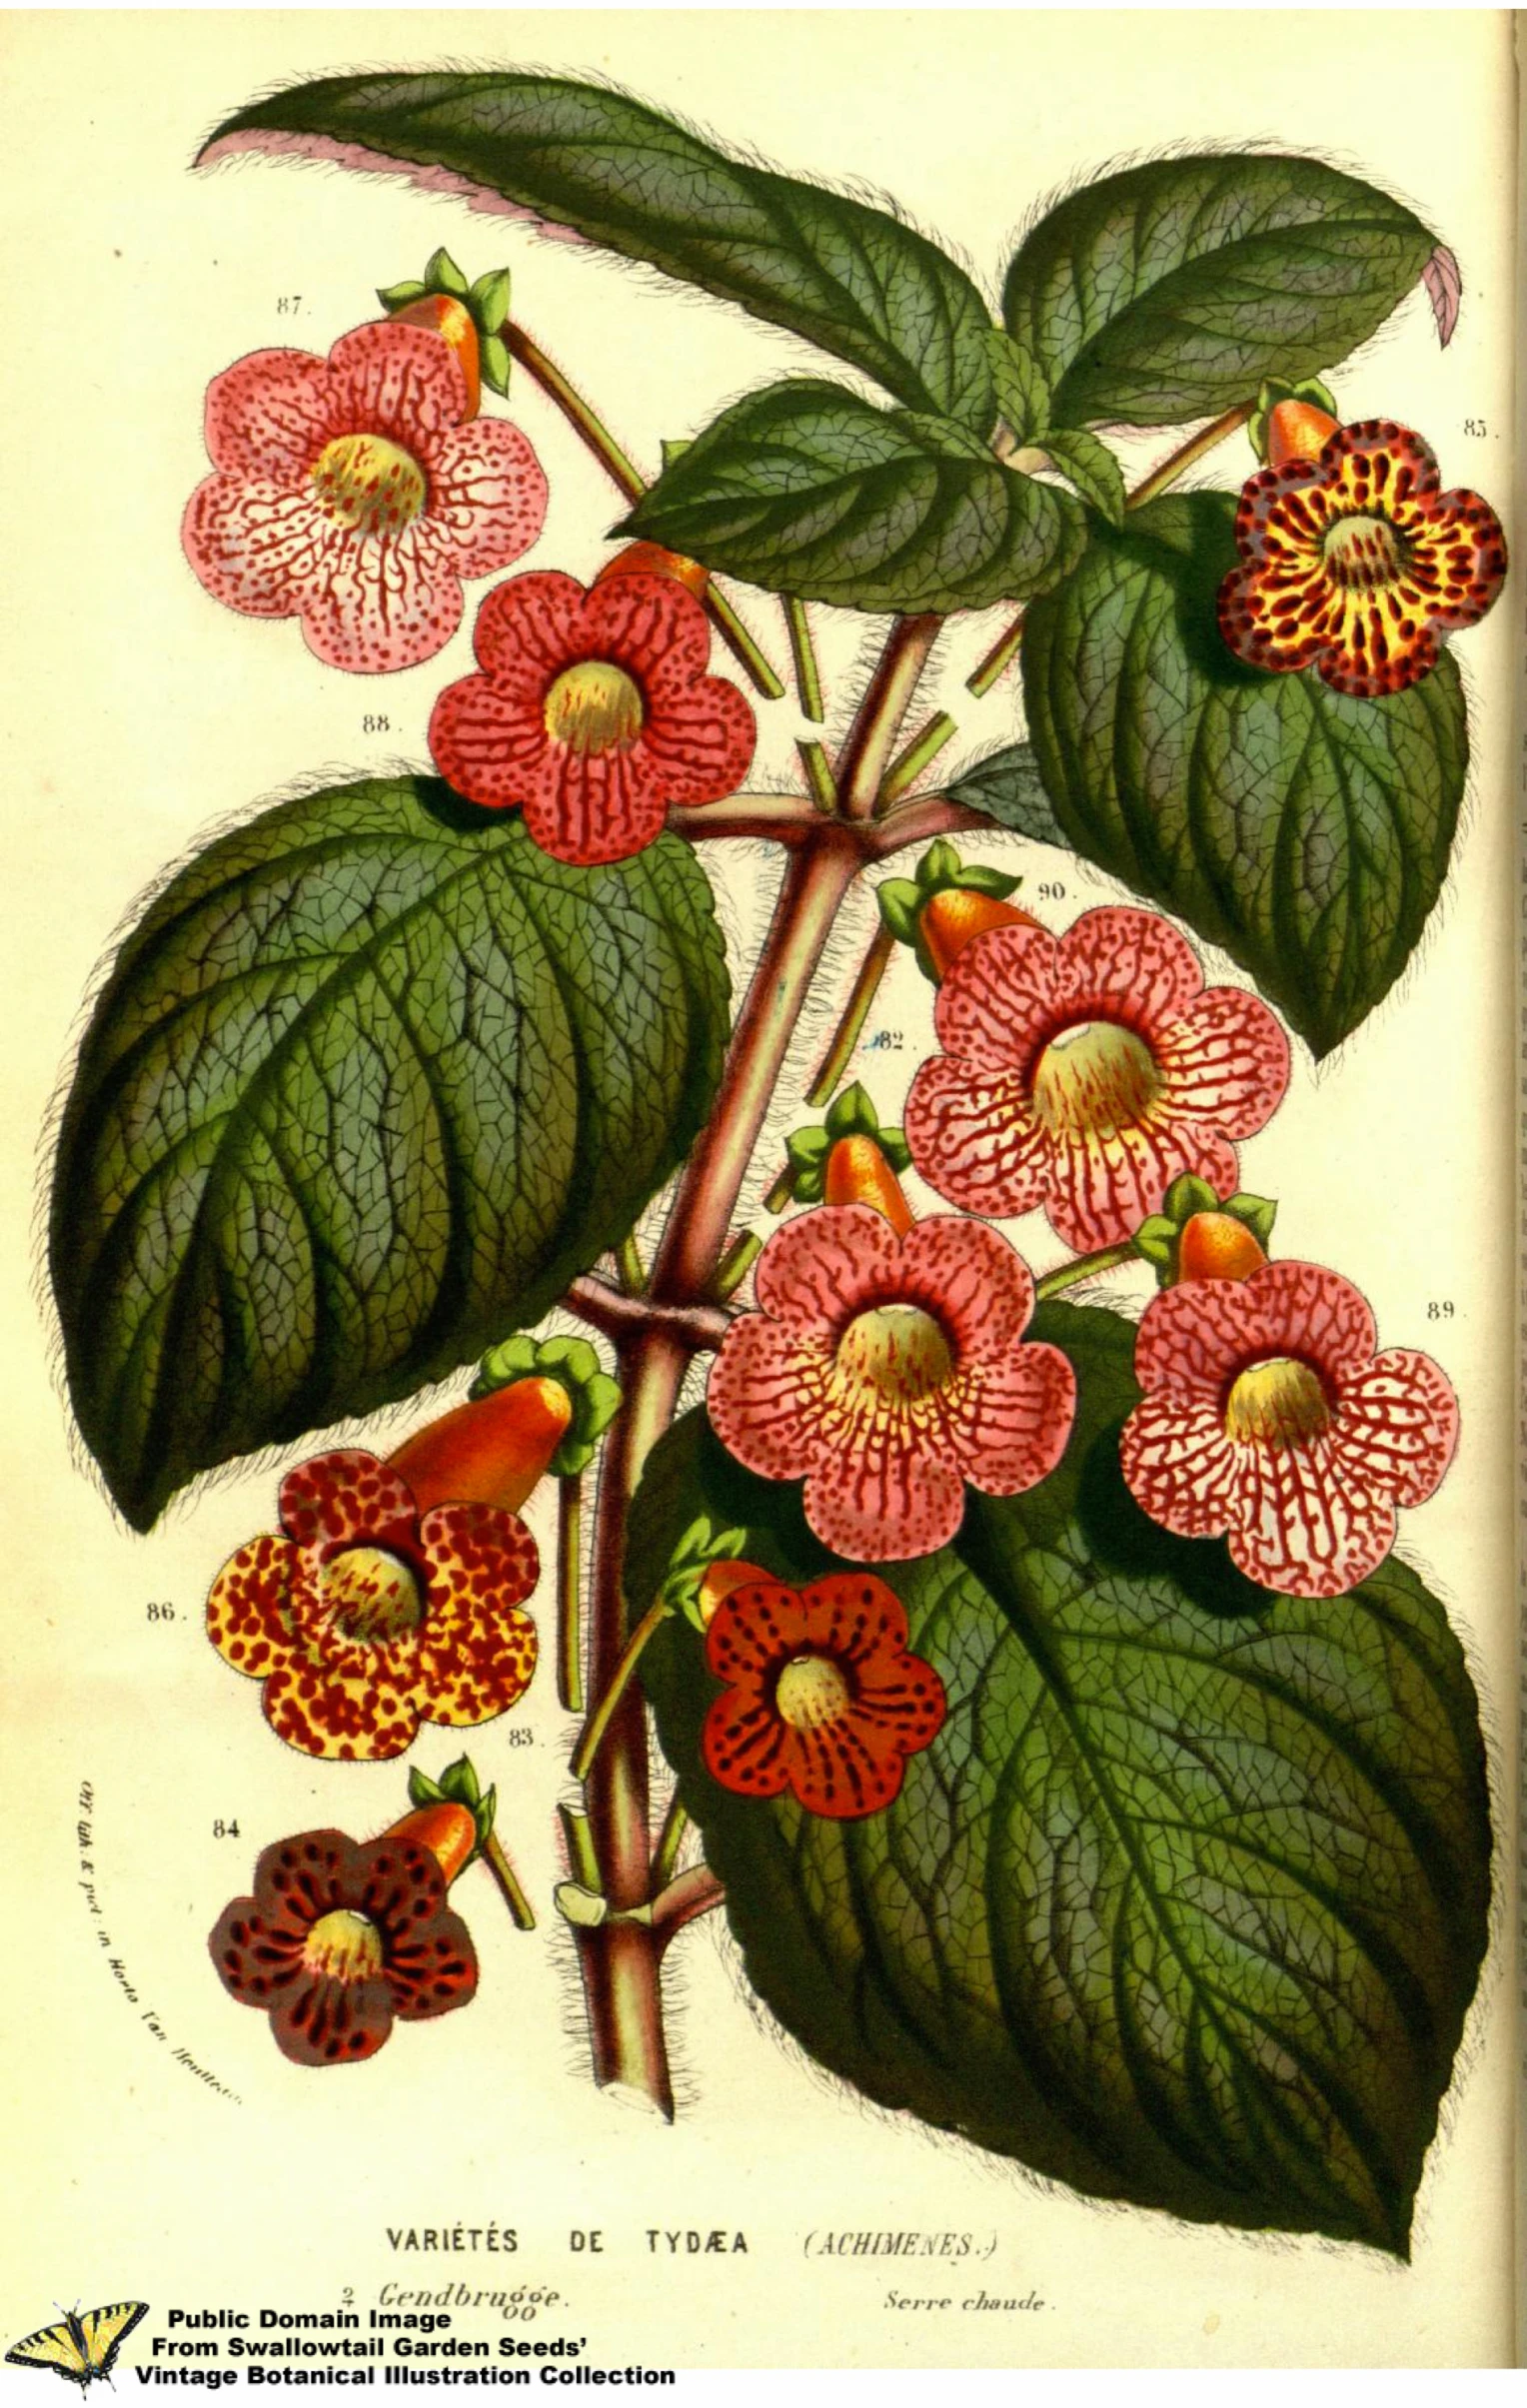 an illustration shows different types of flowers